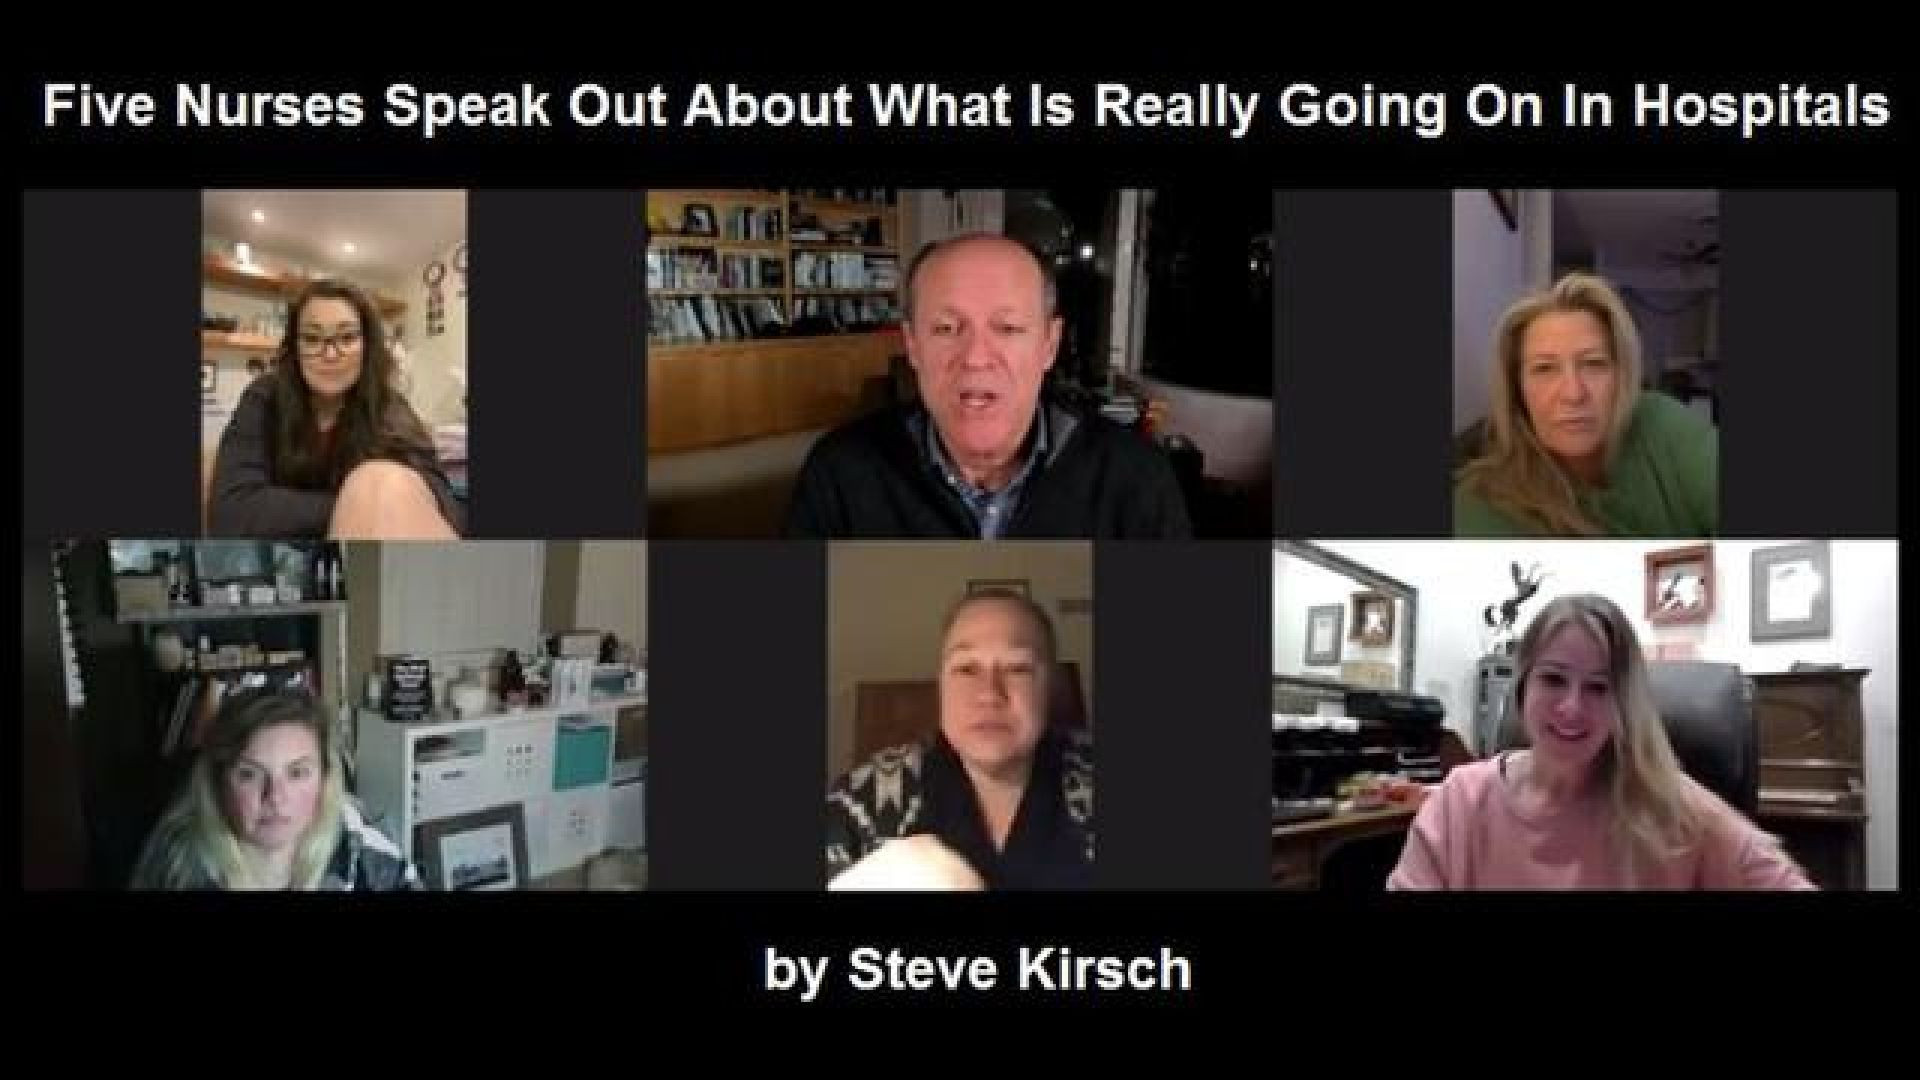 ⁣FIVE NURSES SPEAK OUT ABOUT WHAT IS REALLY GOING ON IN HOSPITALS BY STEVE KIRSCH